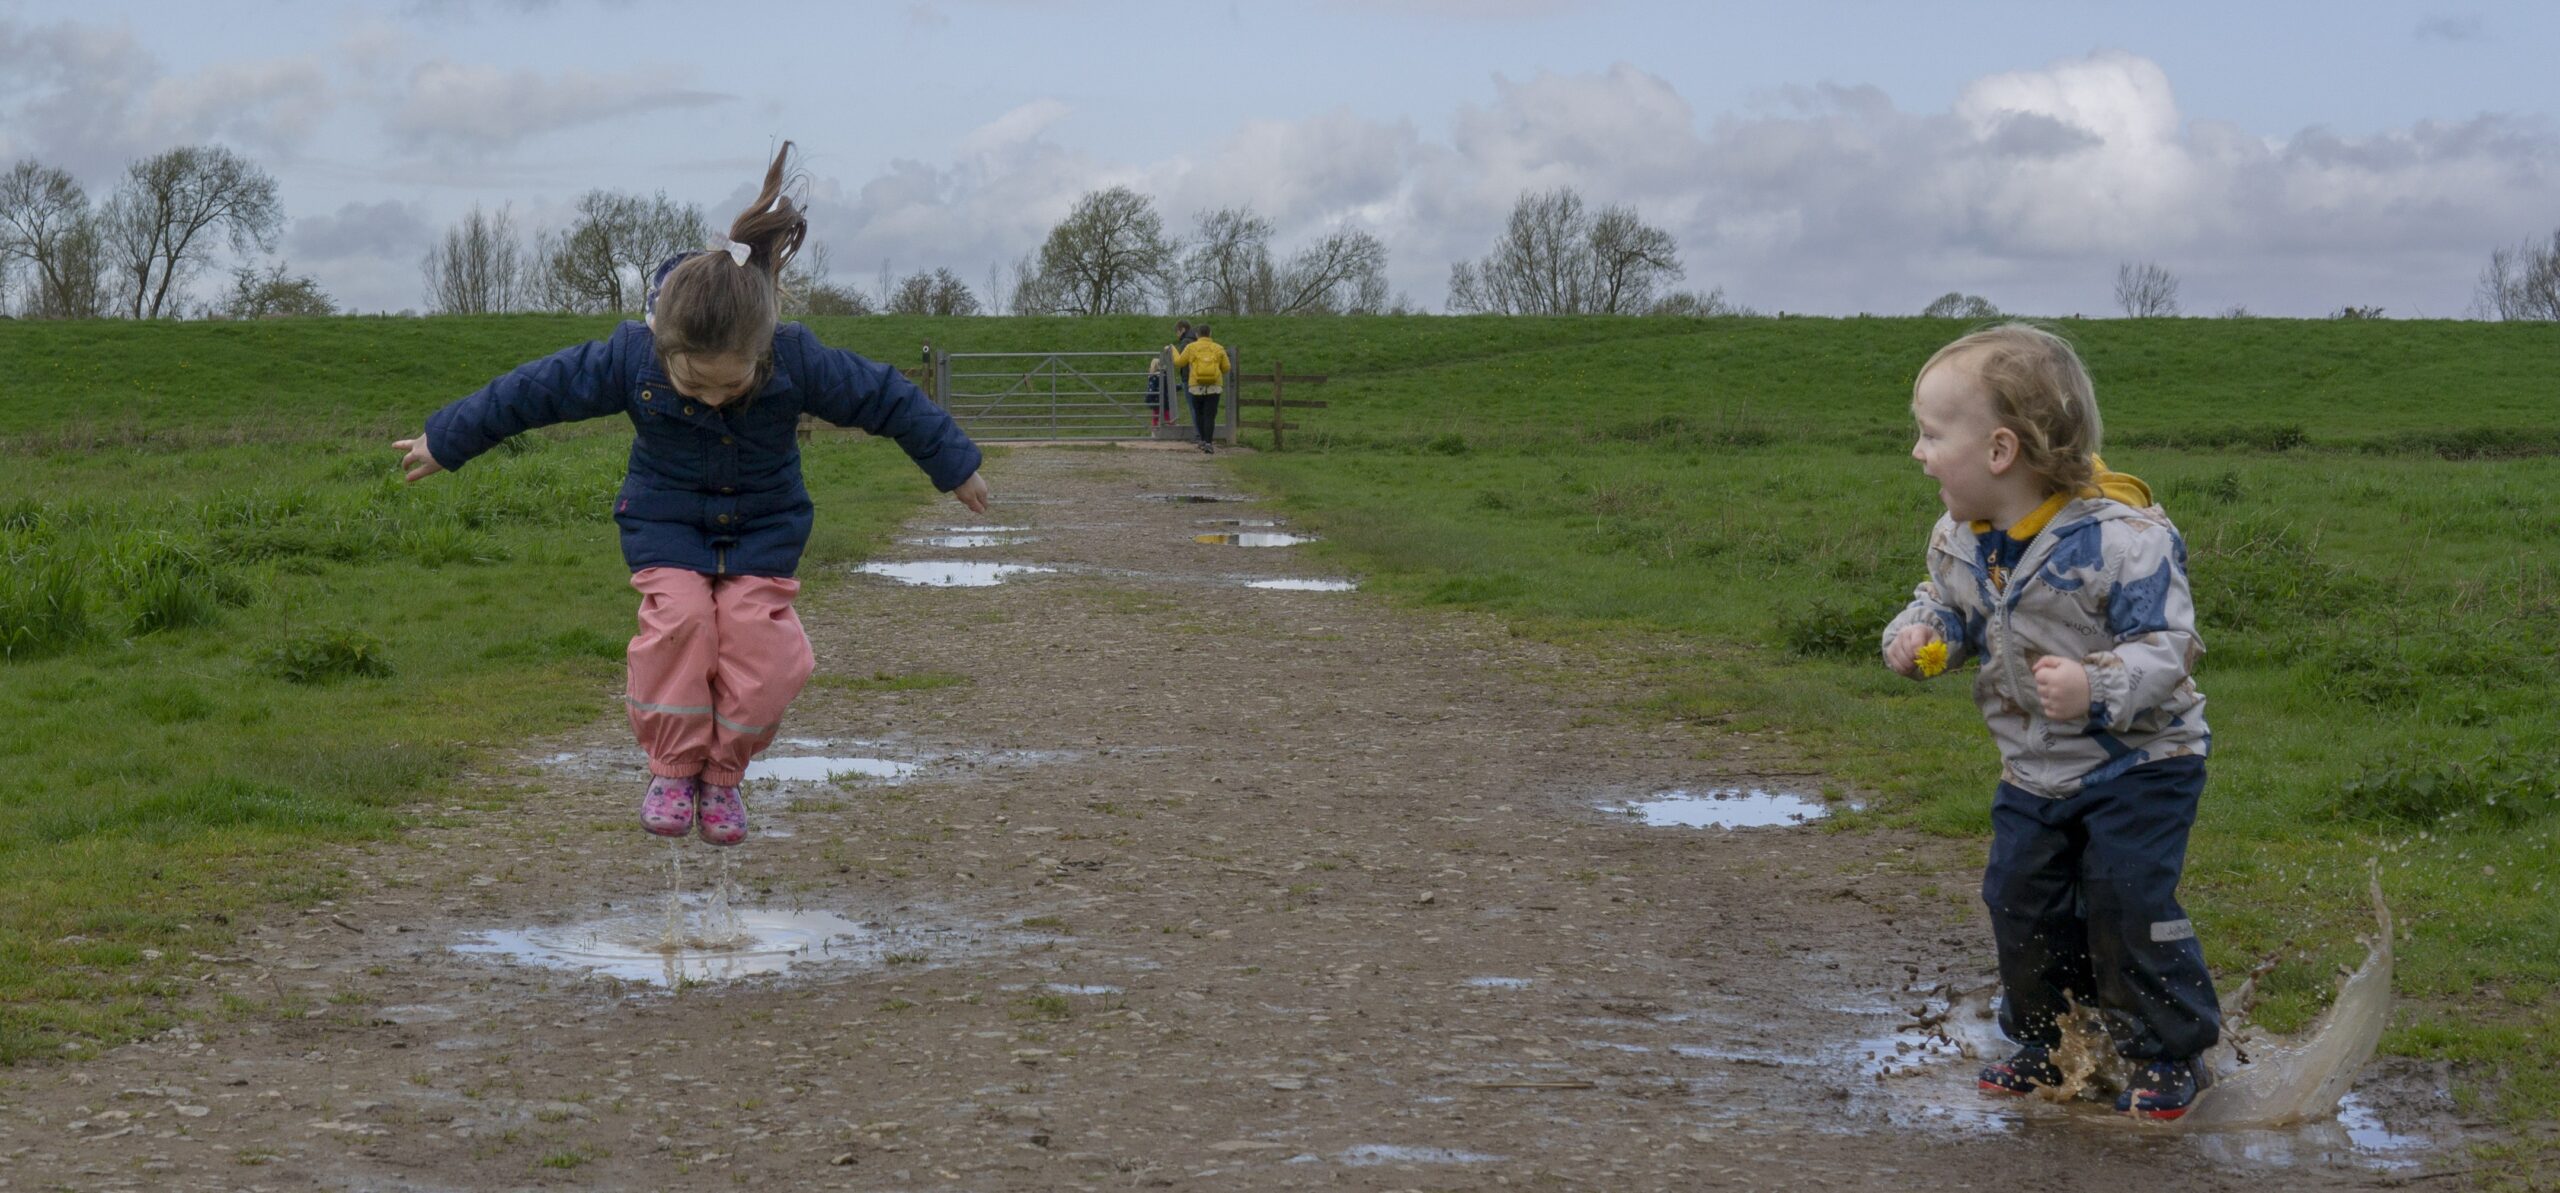 two small children jumping in puddles